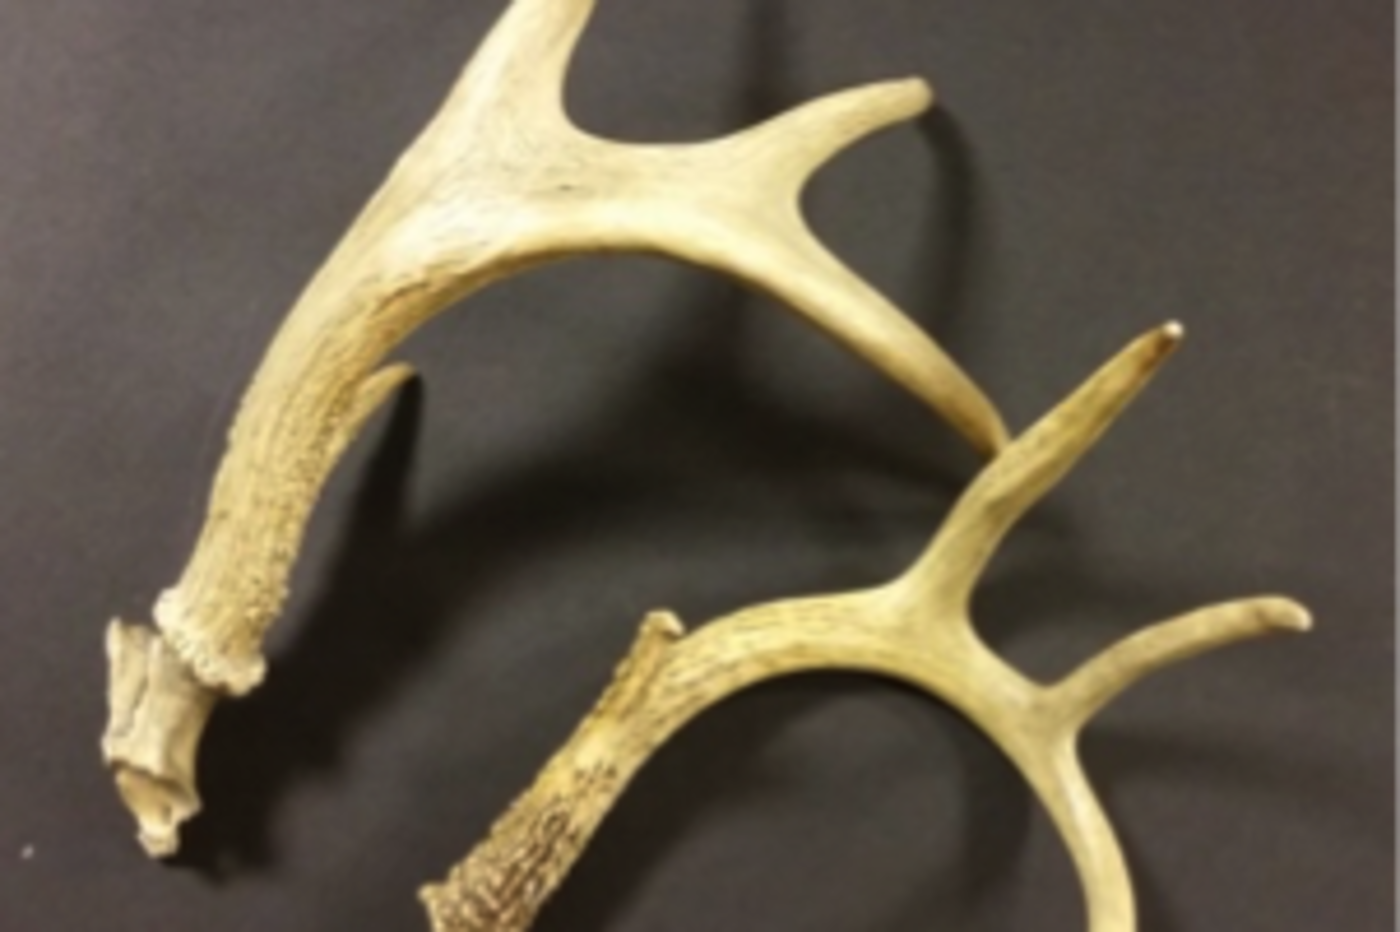 1640824150 white taileddeer Antlers: What's Their Function?